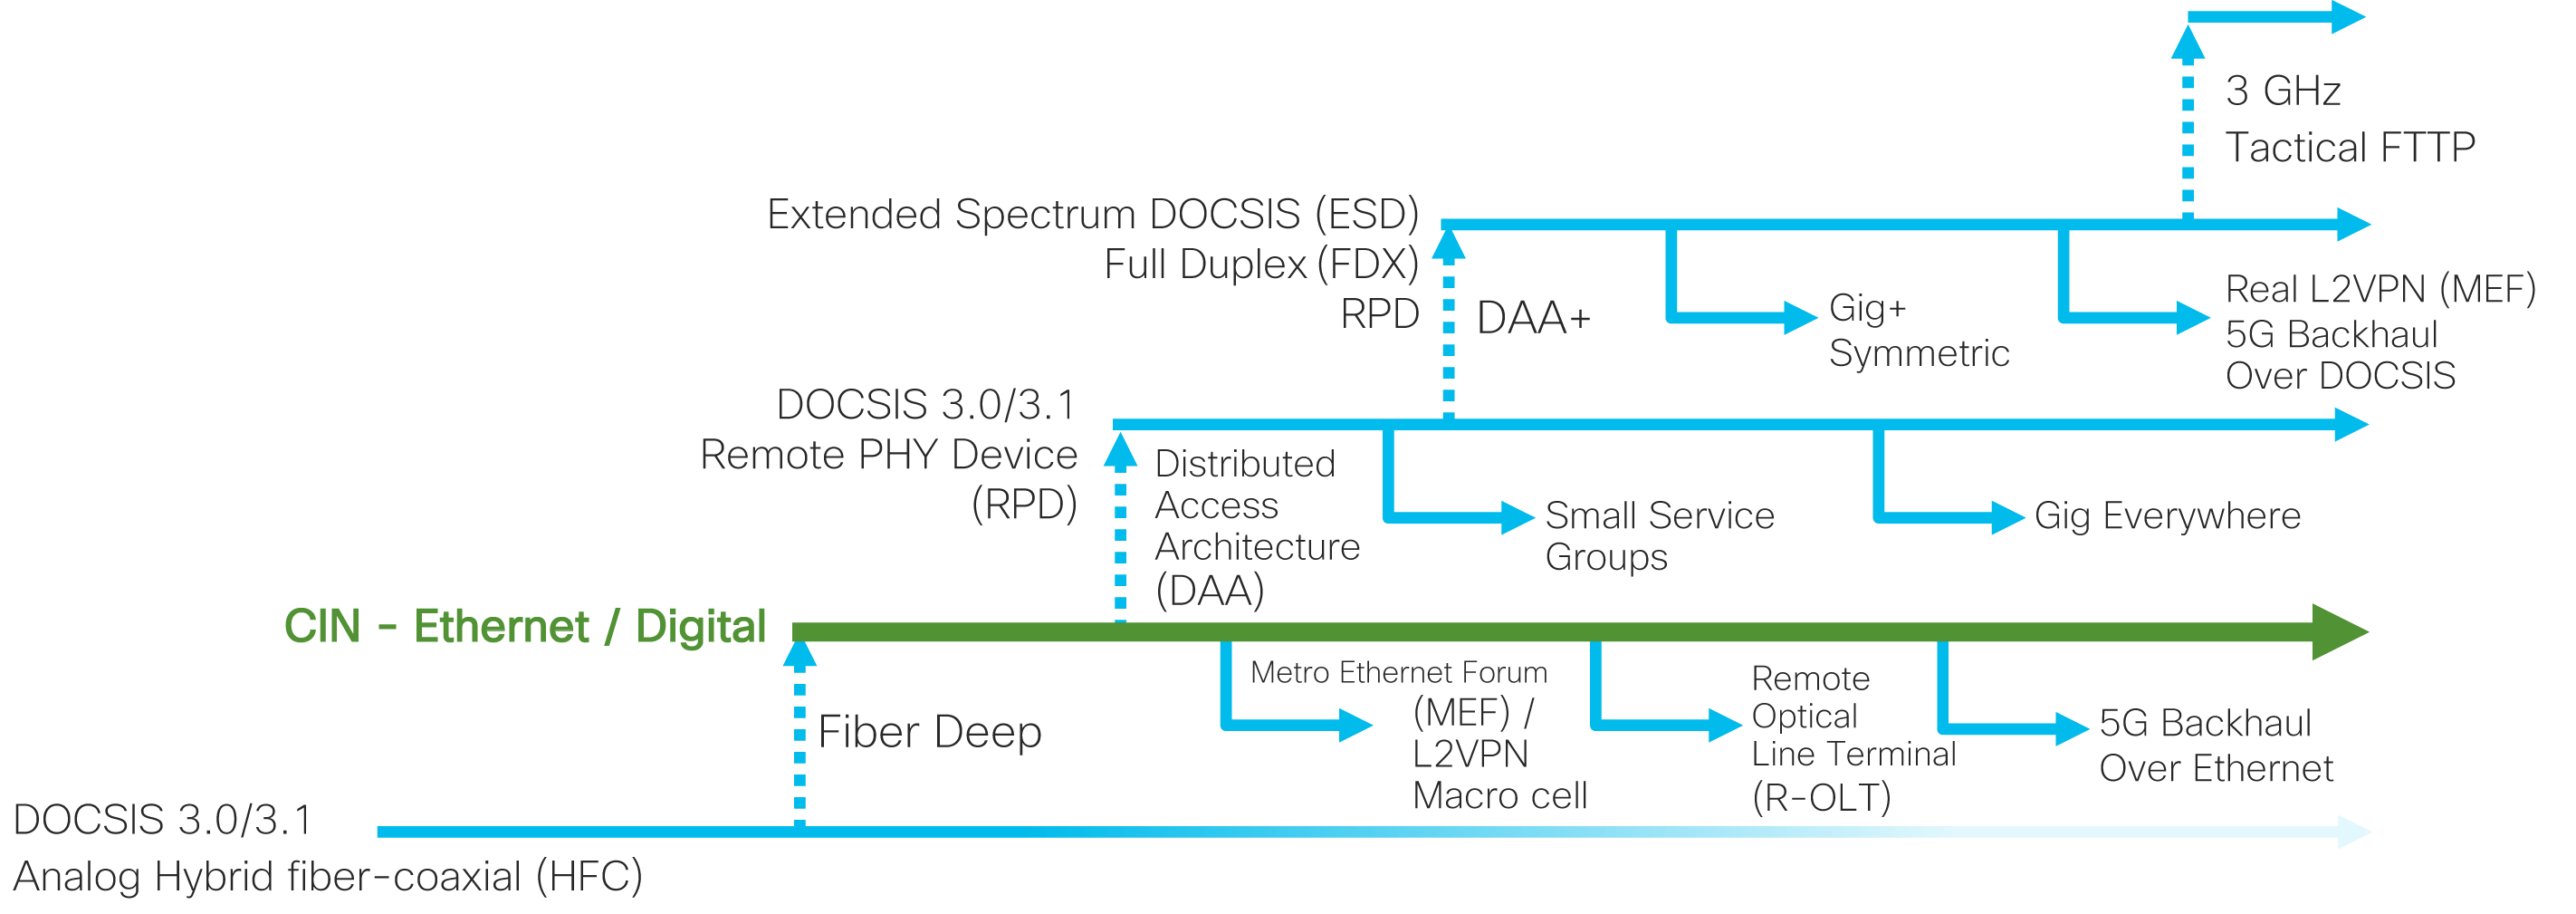 Figure 1. DOCSIS was the last major capacity inflection point; CIN is the next.